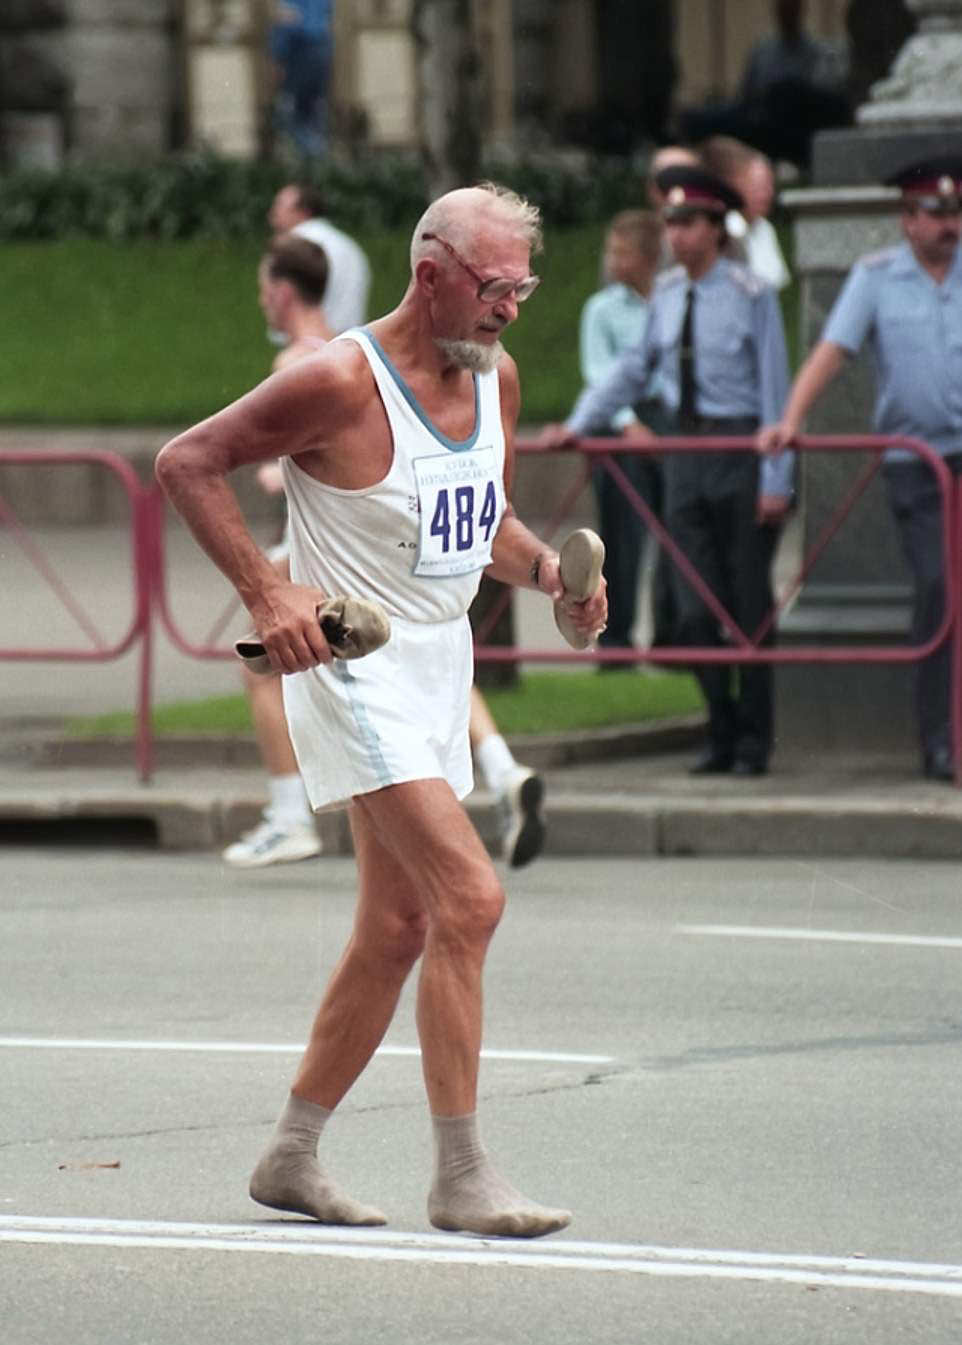 Shoeless Race: Man finishes a race barefoot, demonstrating determination, 1998.